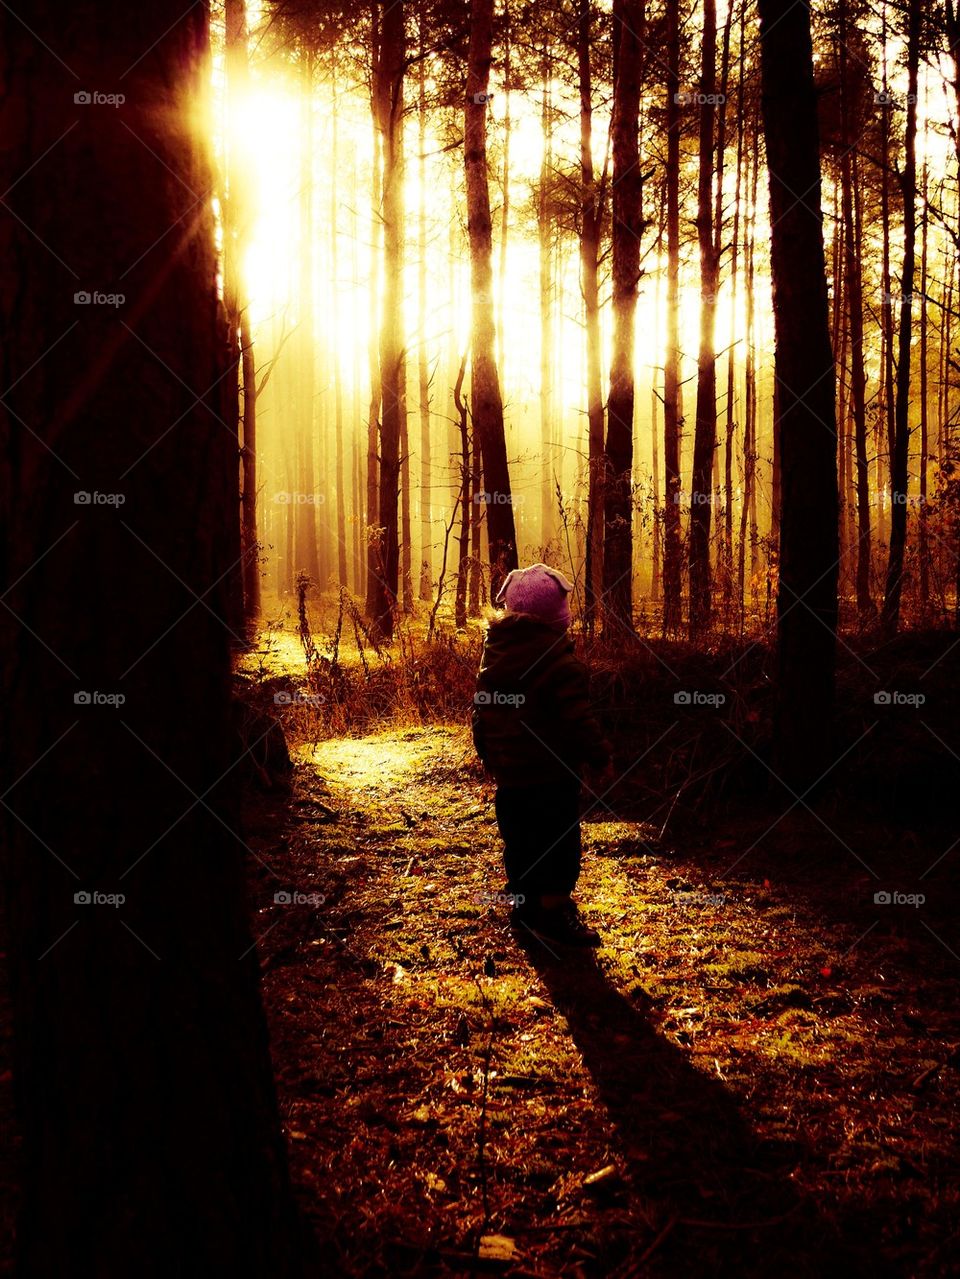 A little boy in forest during sunset